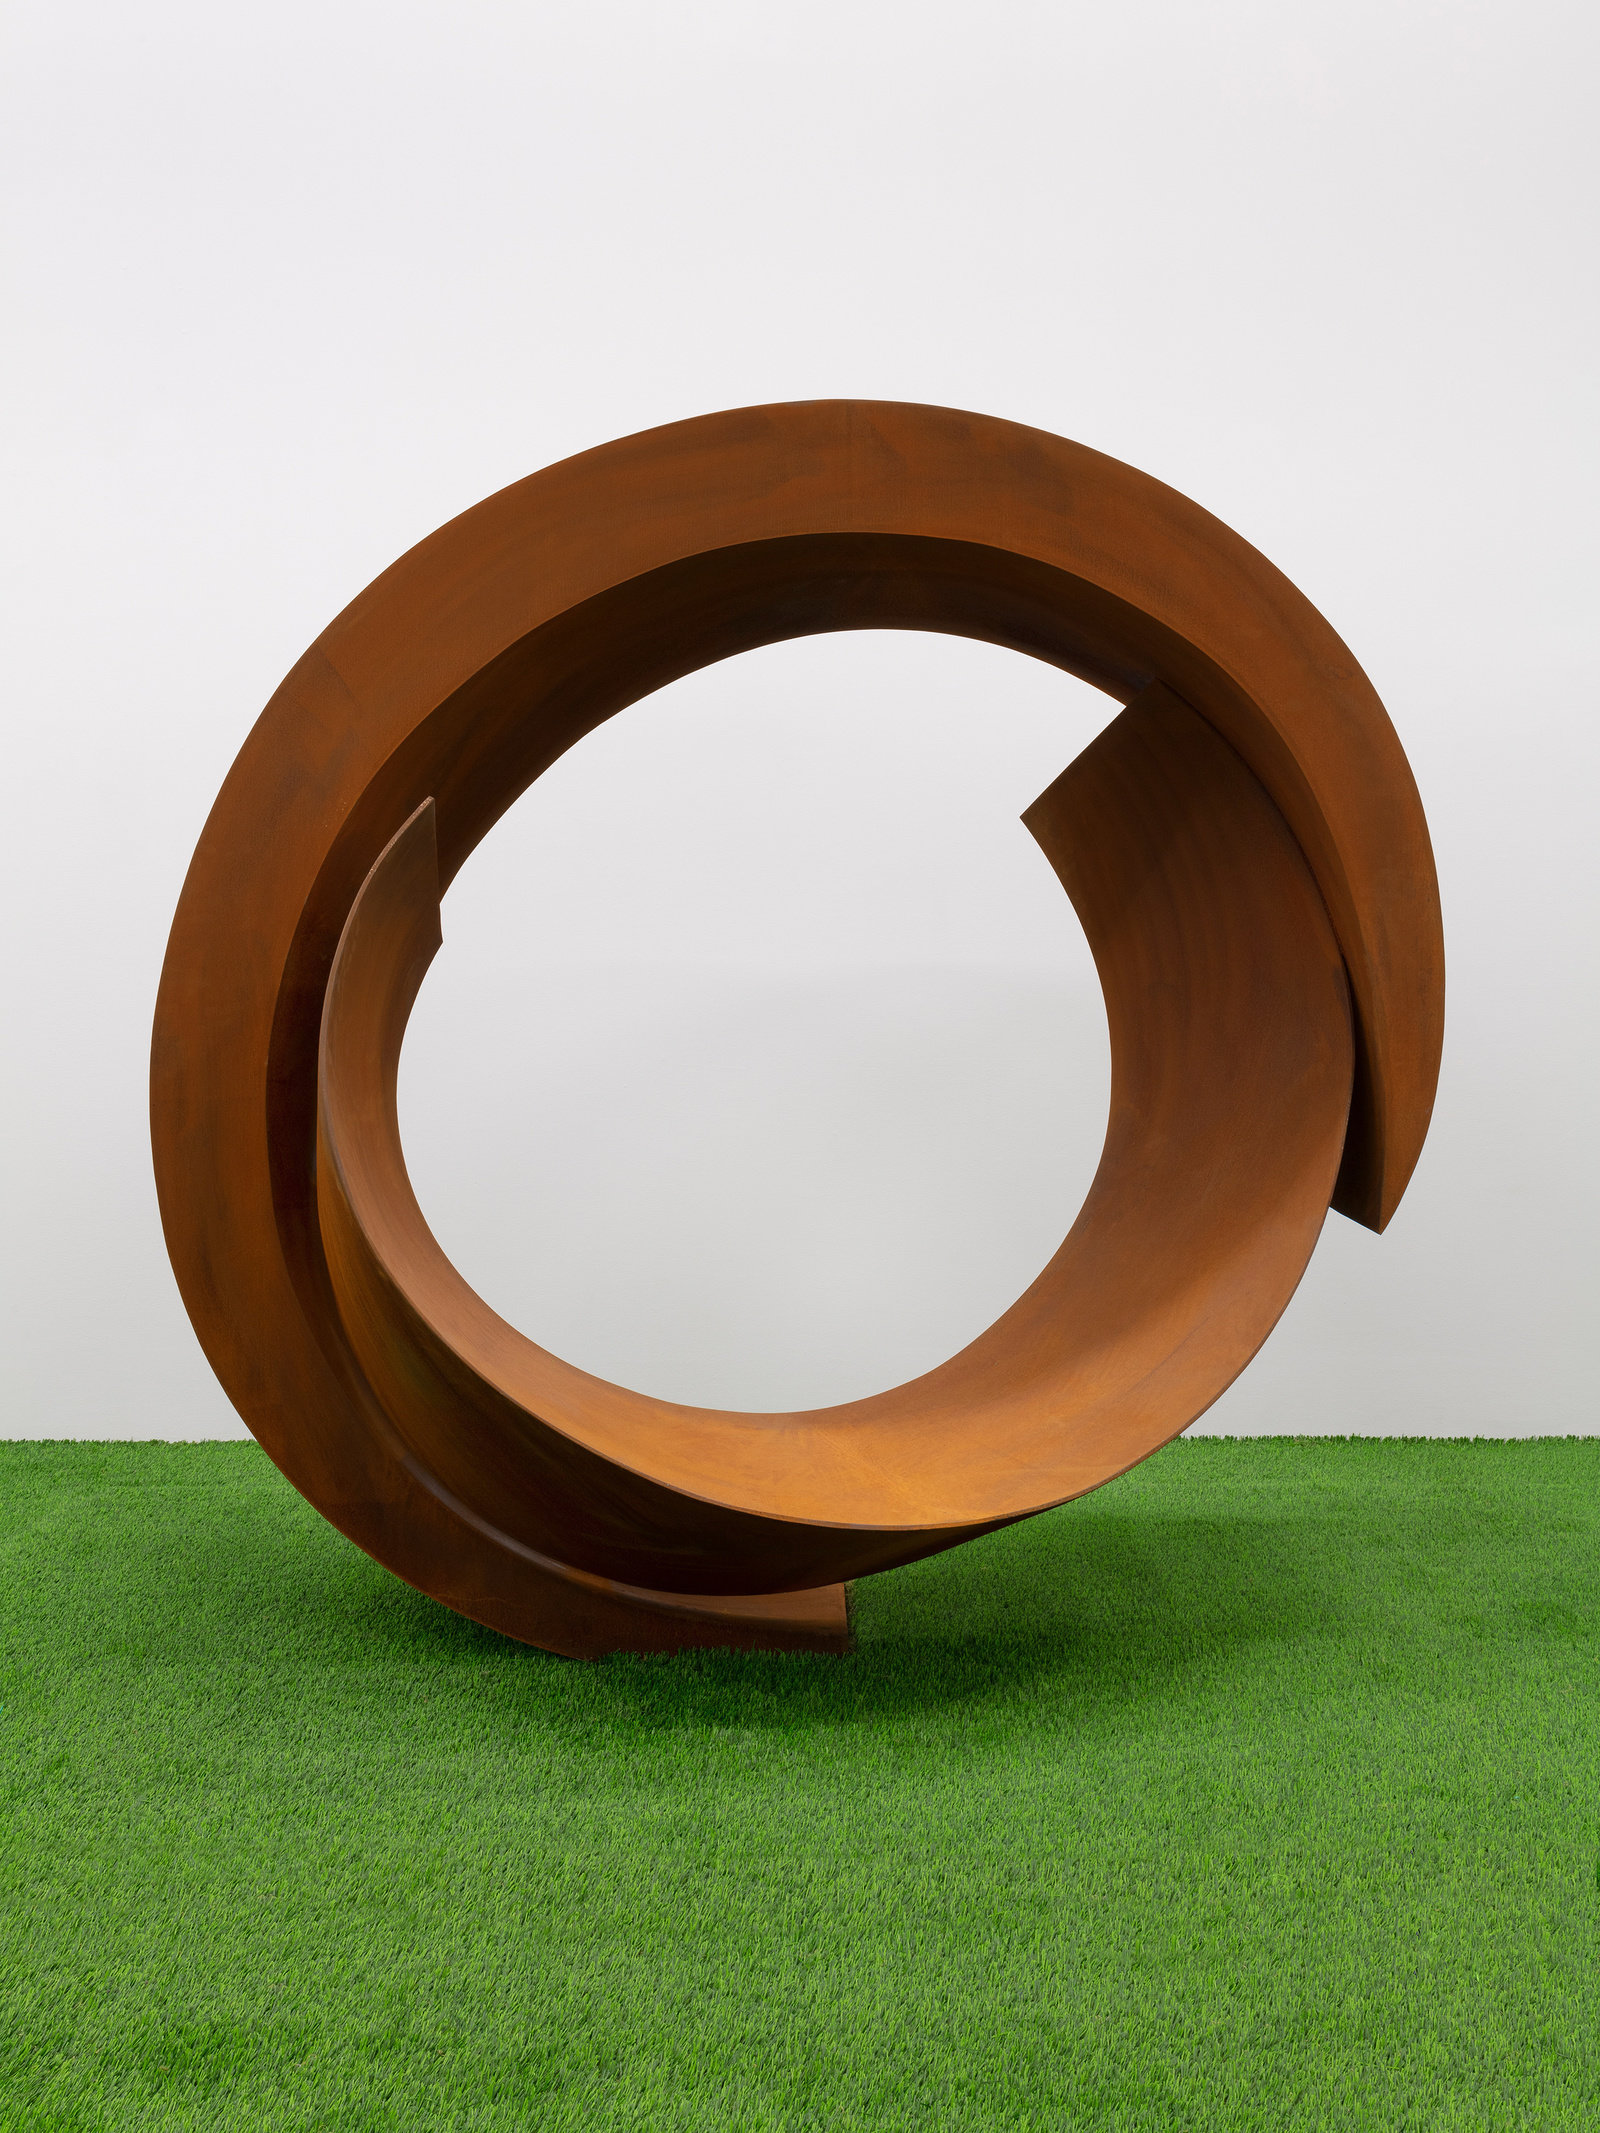 Pepper, helena, 2014 2018, cor ten steel, edition of 4, 80 5 8 x 83 3 8 x 50 3 4 in., 205 x 212 x 129 cm, non 60.576 pierre le hors